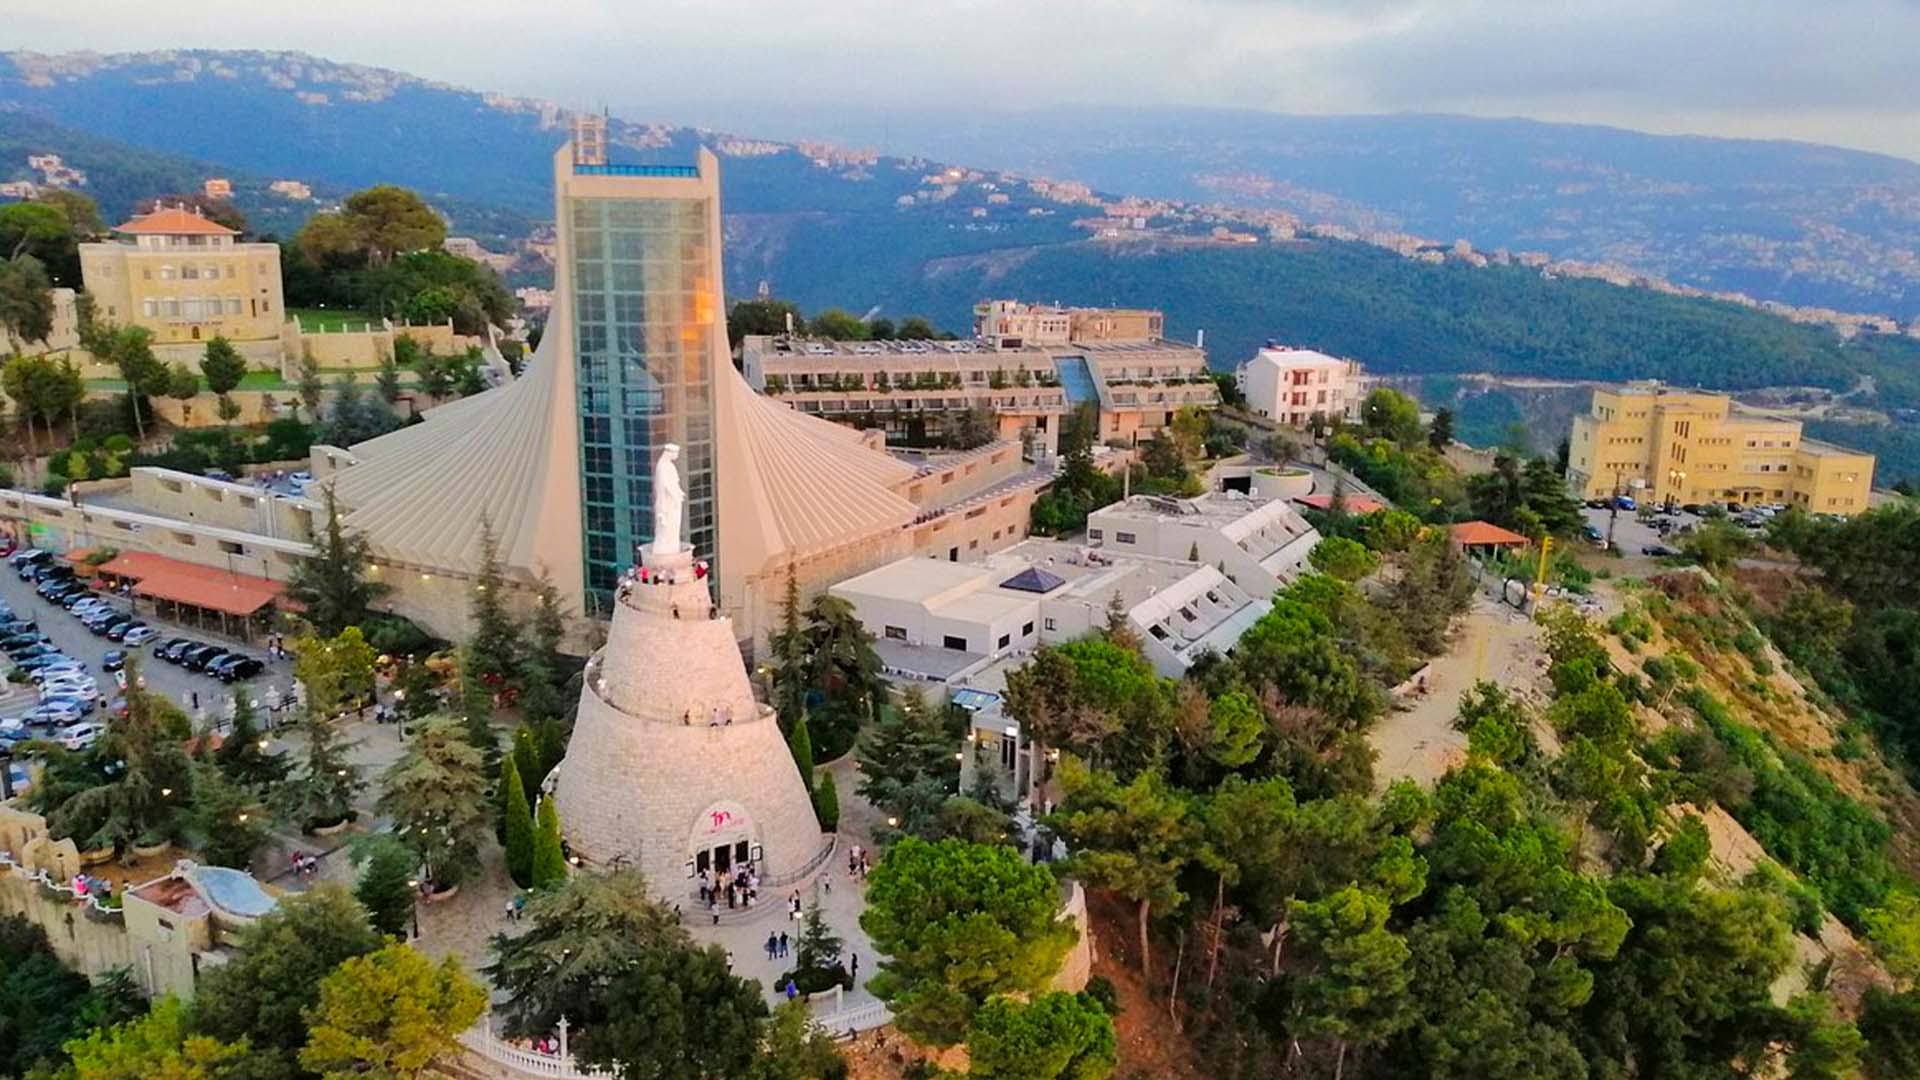 A panoramic photograph immortalizes the regal statue of Our Lady of Lebanon, situated in Harissa, embraced by verdant greenery and framed by majestic mountains.